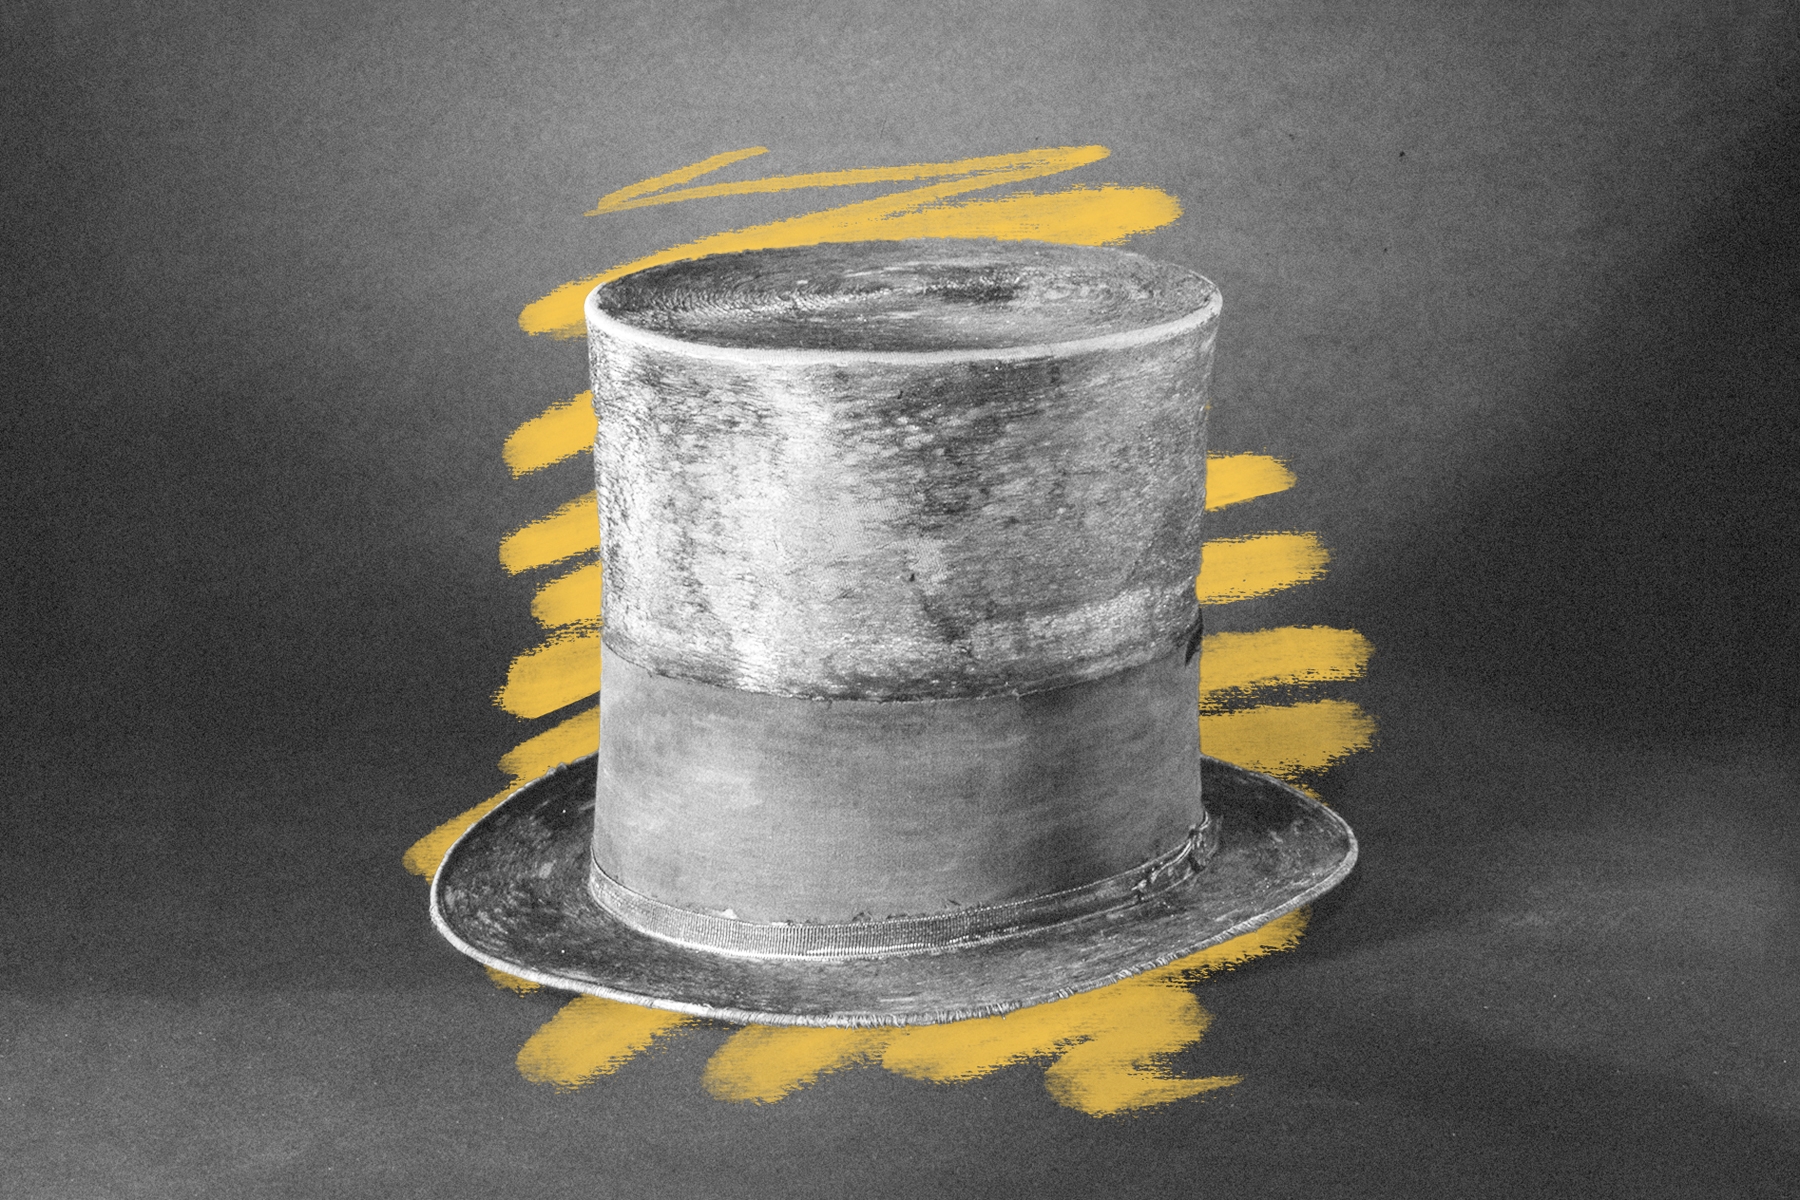 Abraham Lincoln's top hat